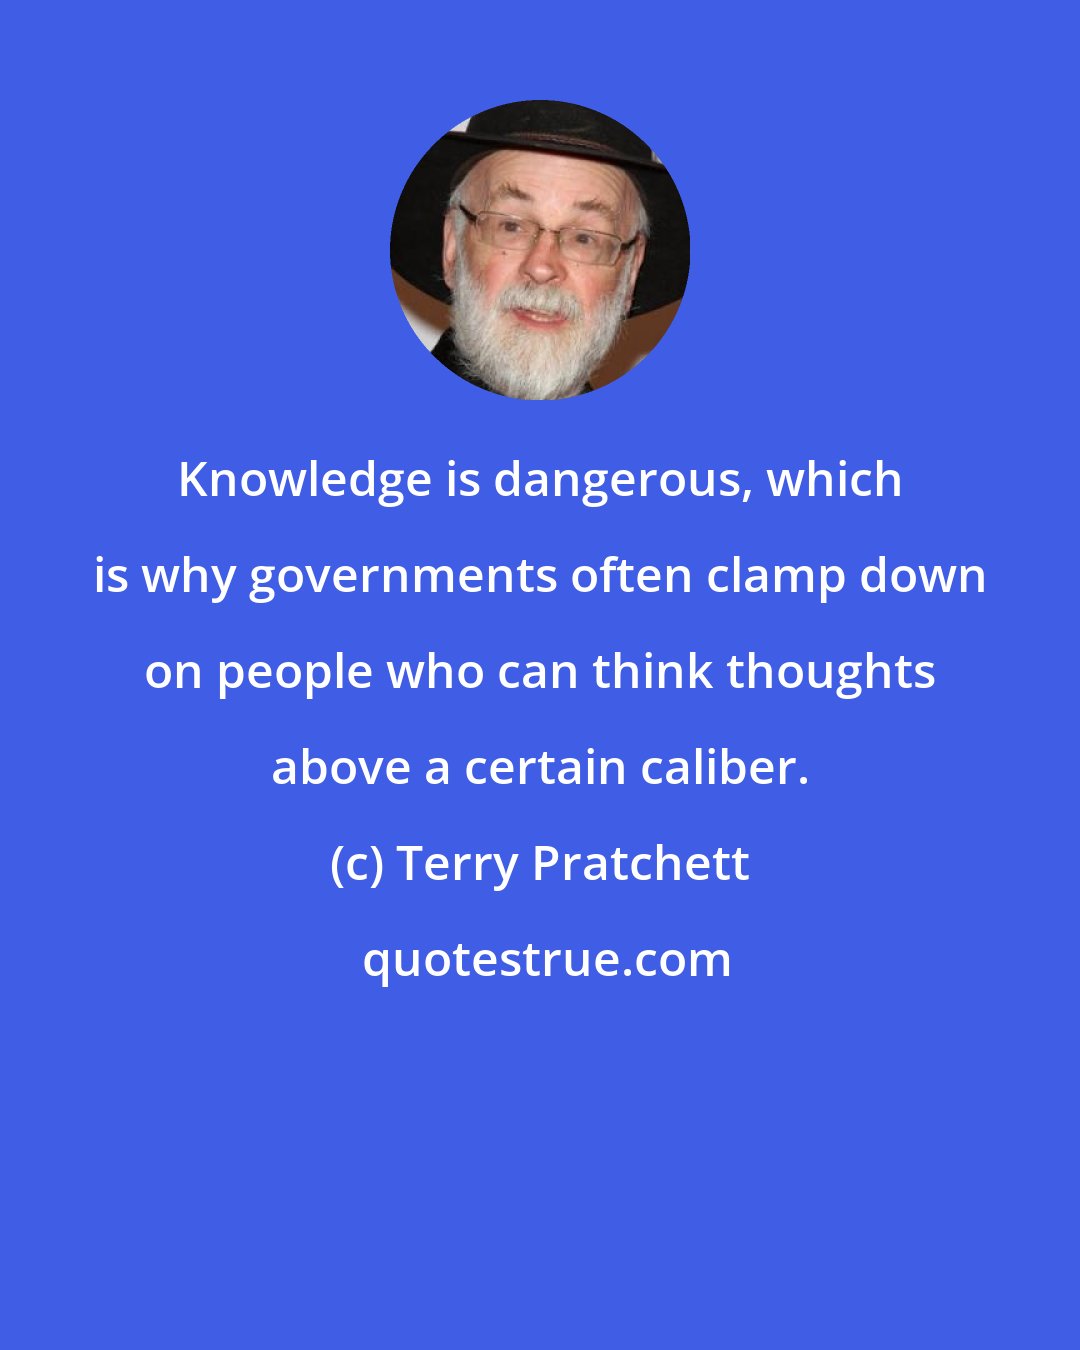 Terry Pratchett: Knowledge is dangerous, which is why governments often clamp down on people who can think thoughts above a certain caliber.